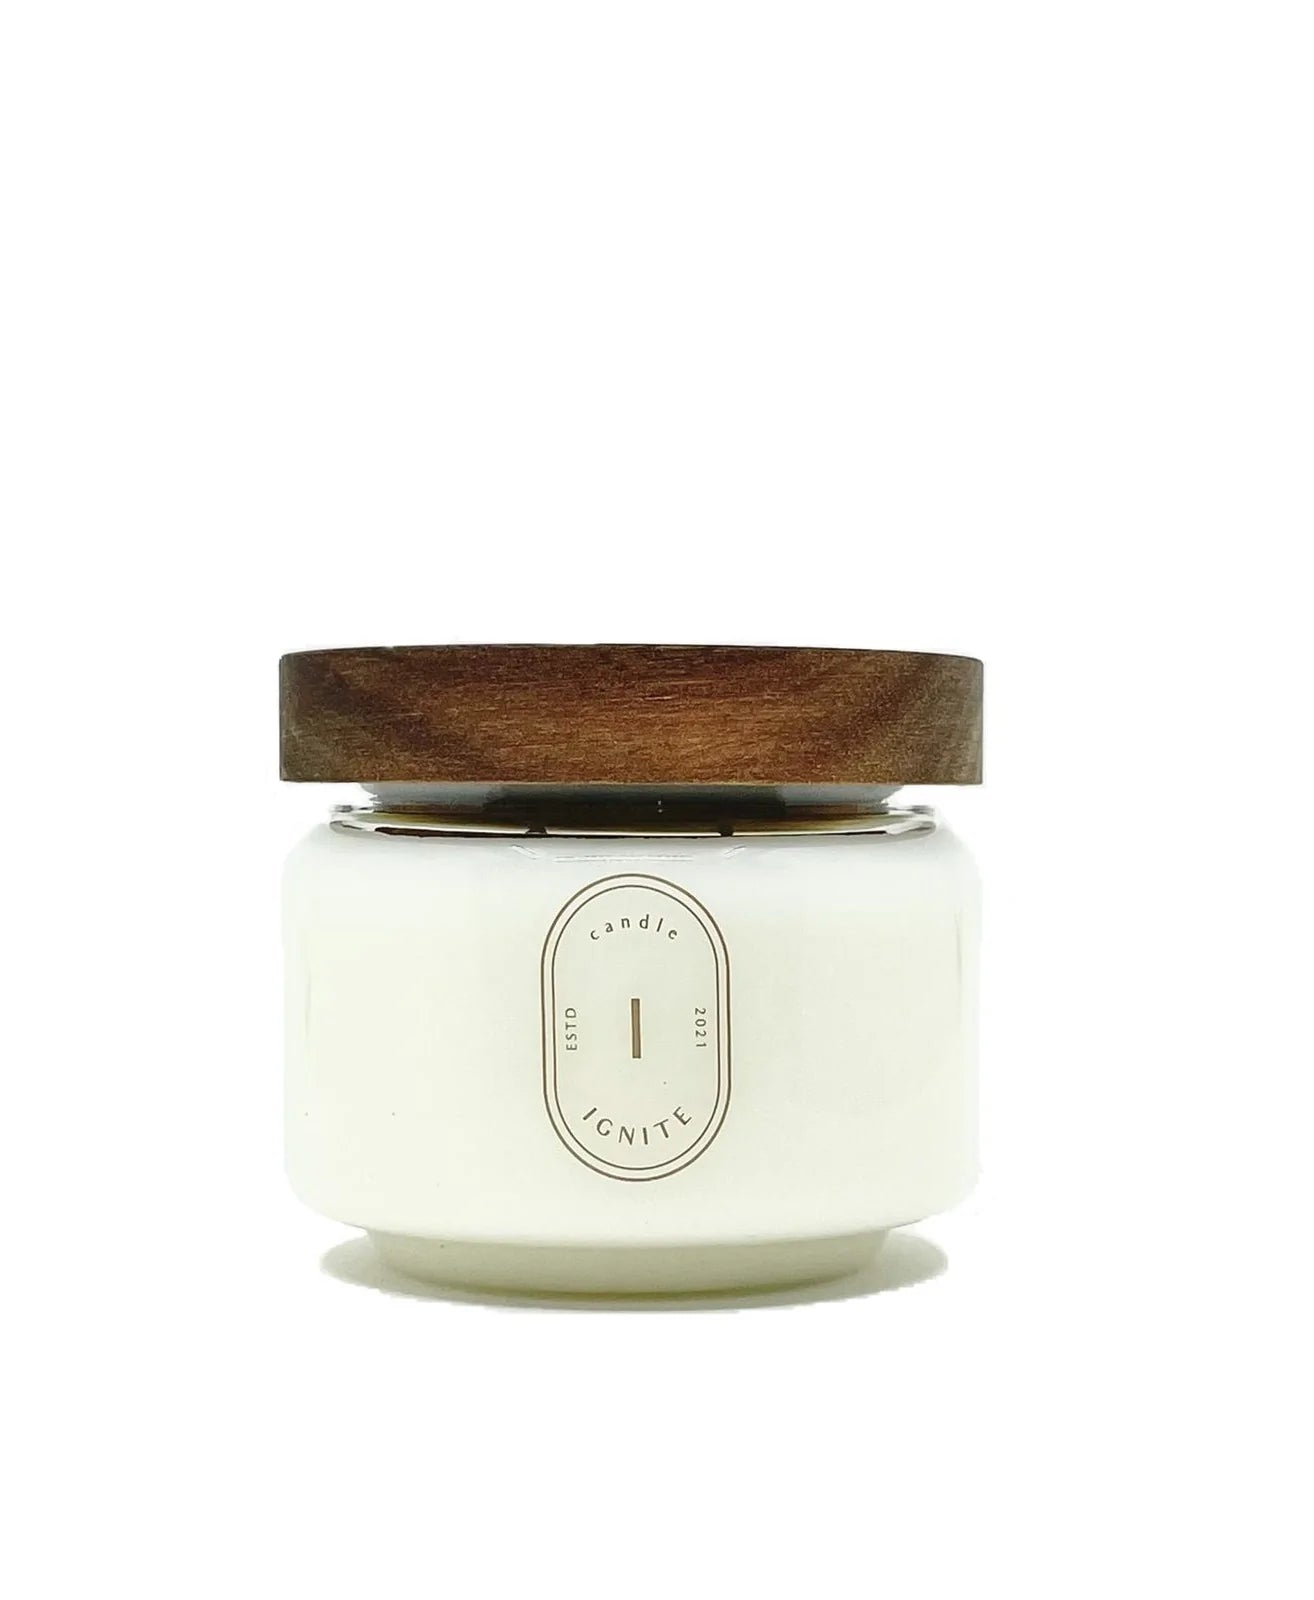 Breathe out aromatherapy scented candle